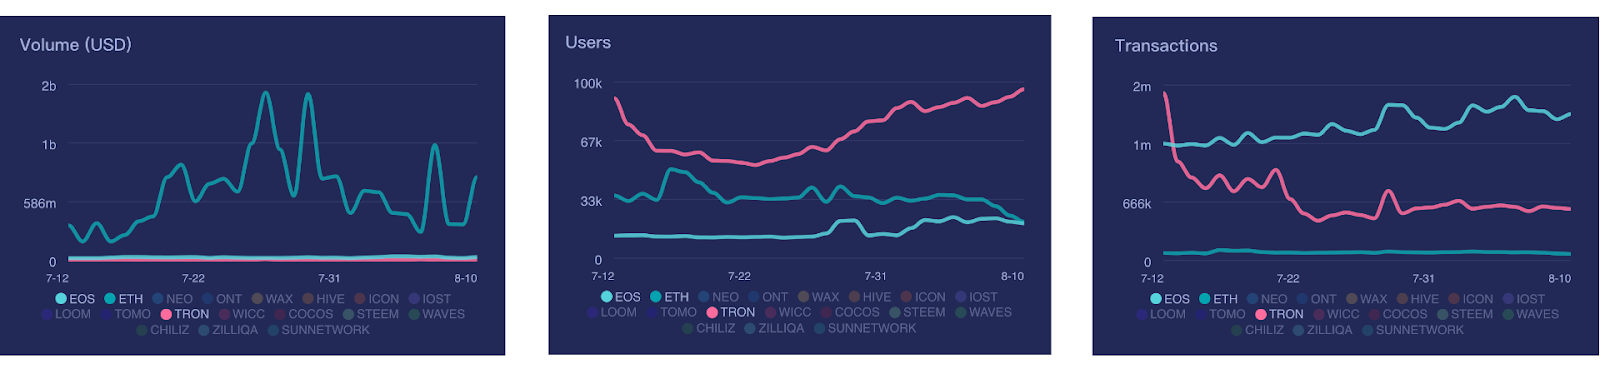 Comparison of volumes on Ethereum, TRON, and EOS by Dapp Review